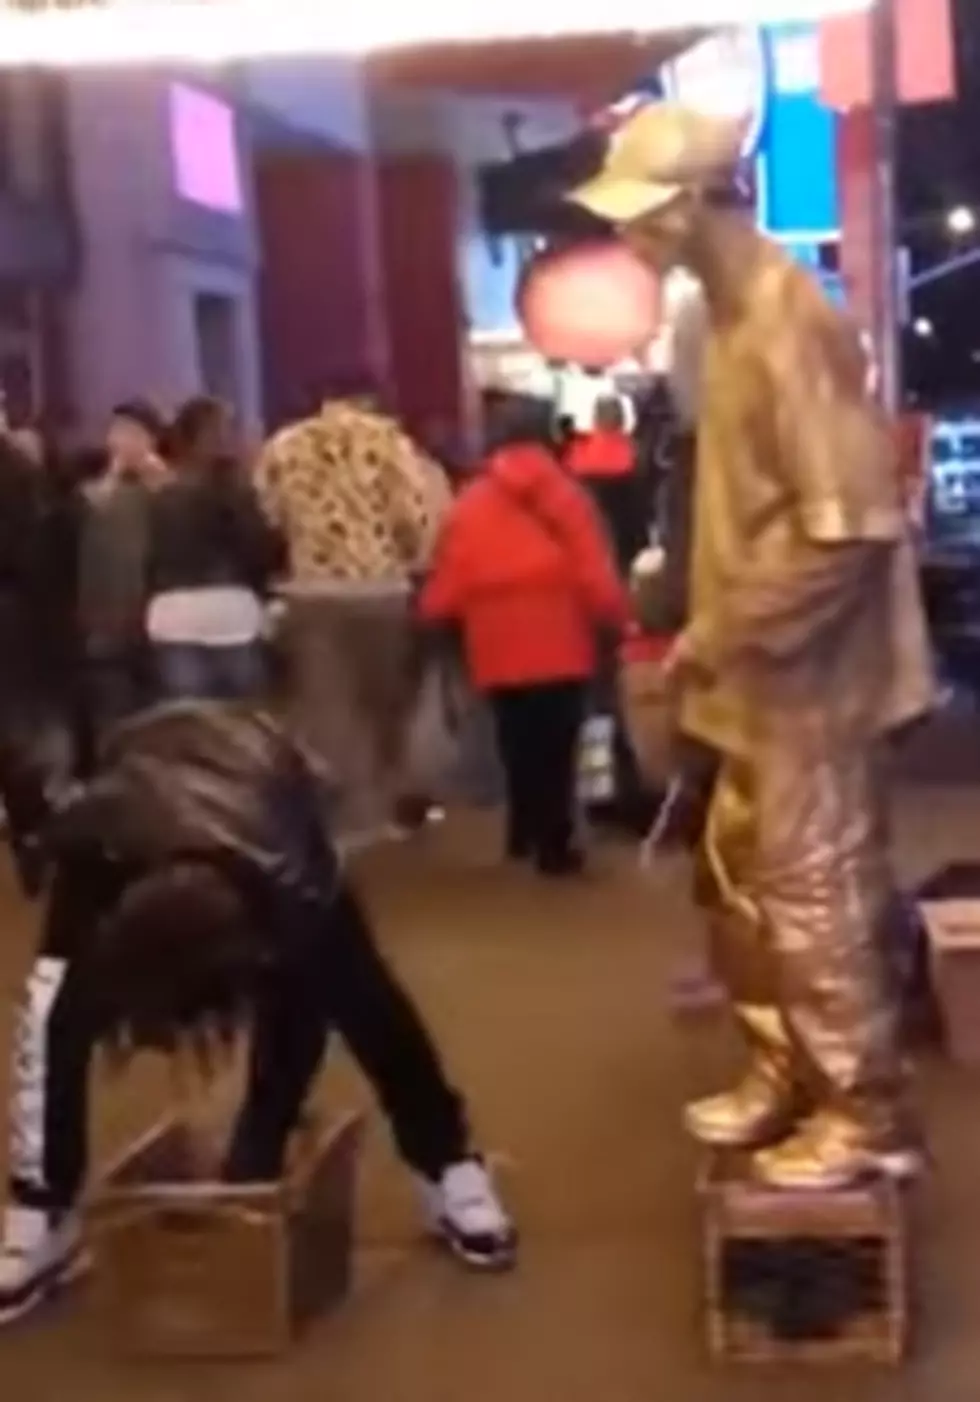 This Is What Happens If You Try To Steal From A Human Statue [VIDEO]